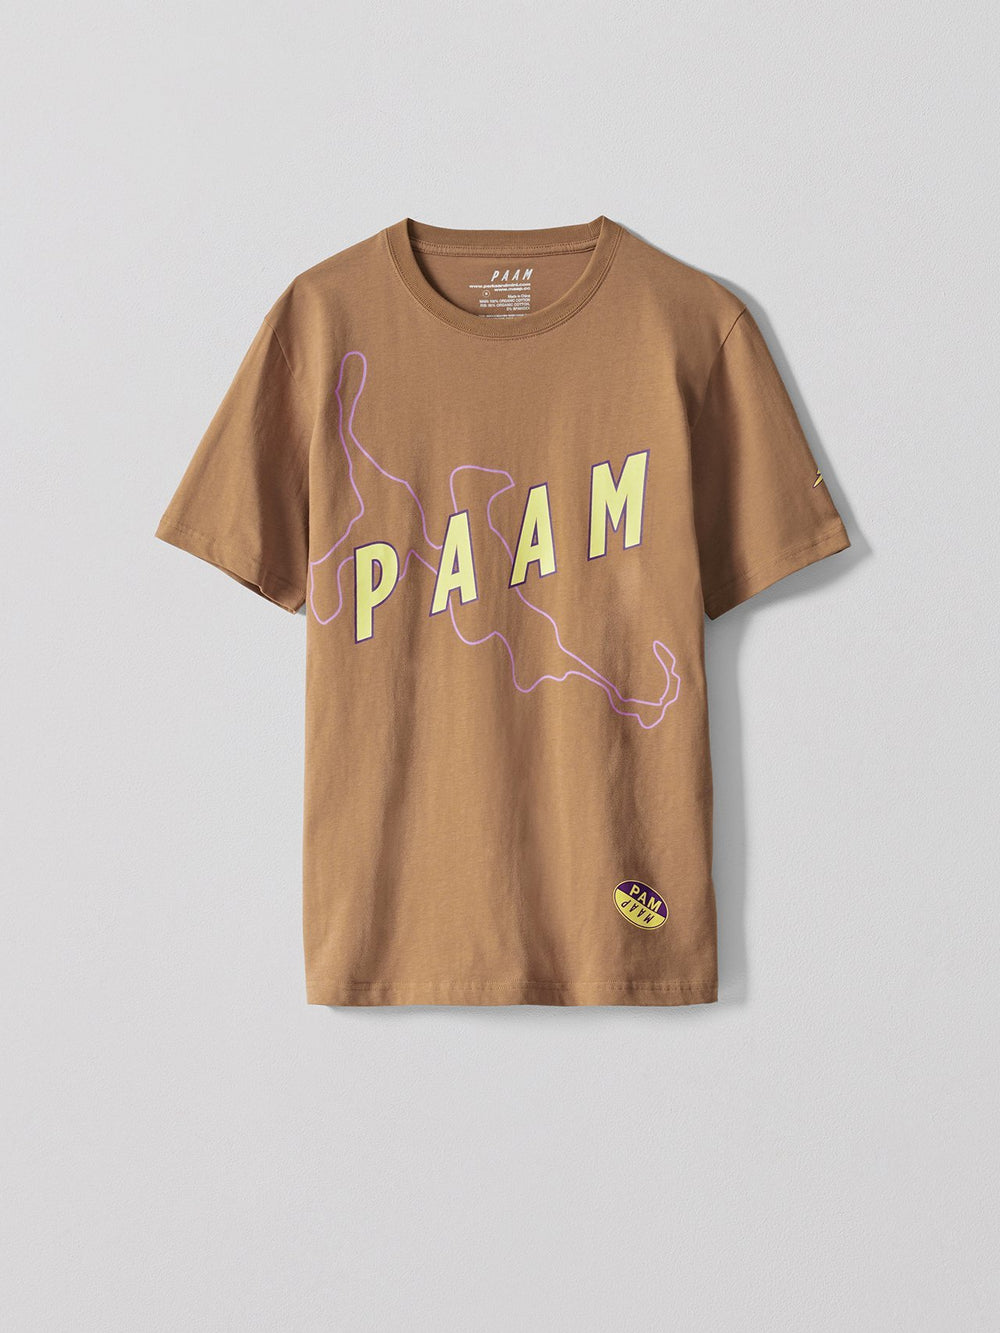 Product Image for PAAM 1.5 Tee